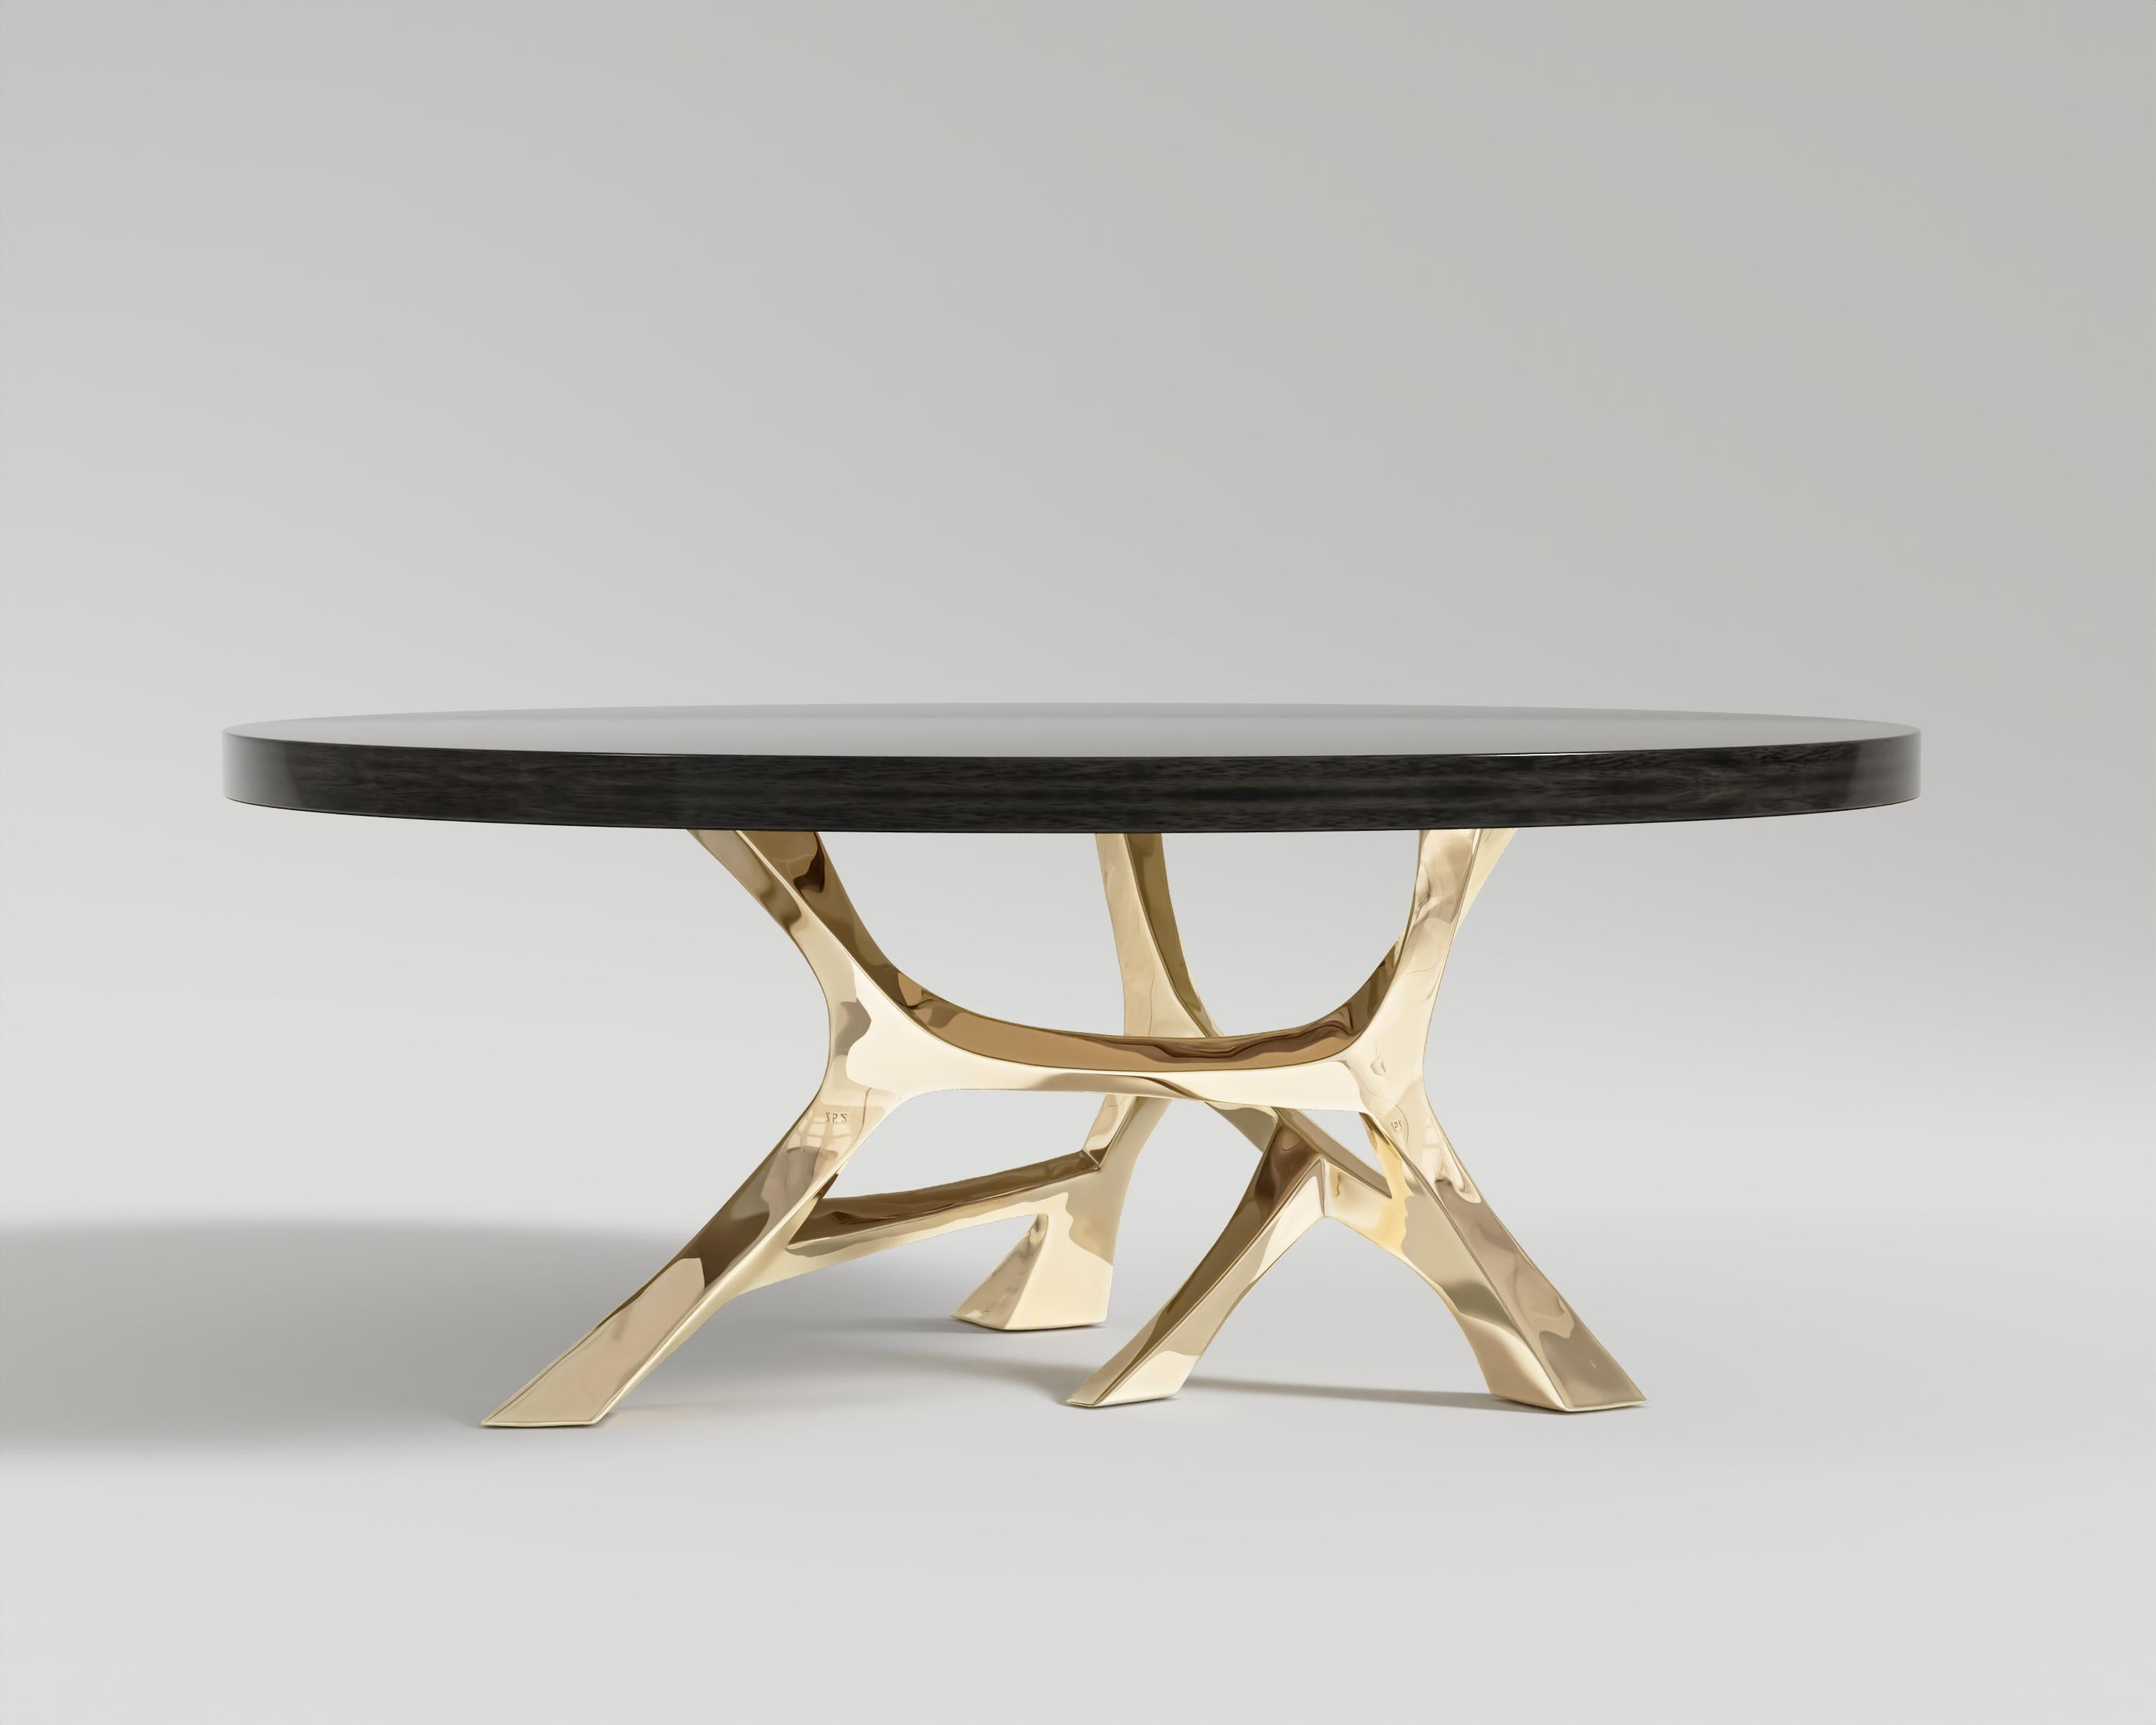 Vena Round Dining Table – Polished Bronze
Introducing the “Vena” – a transcendent masterpiece that embodies the pinnacle of luxury and craftsmanship in the world of bespoke furniture. This exquisite dining table is not just an ensemble; it’s an